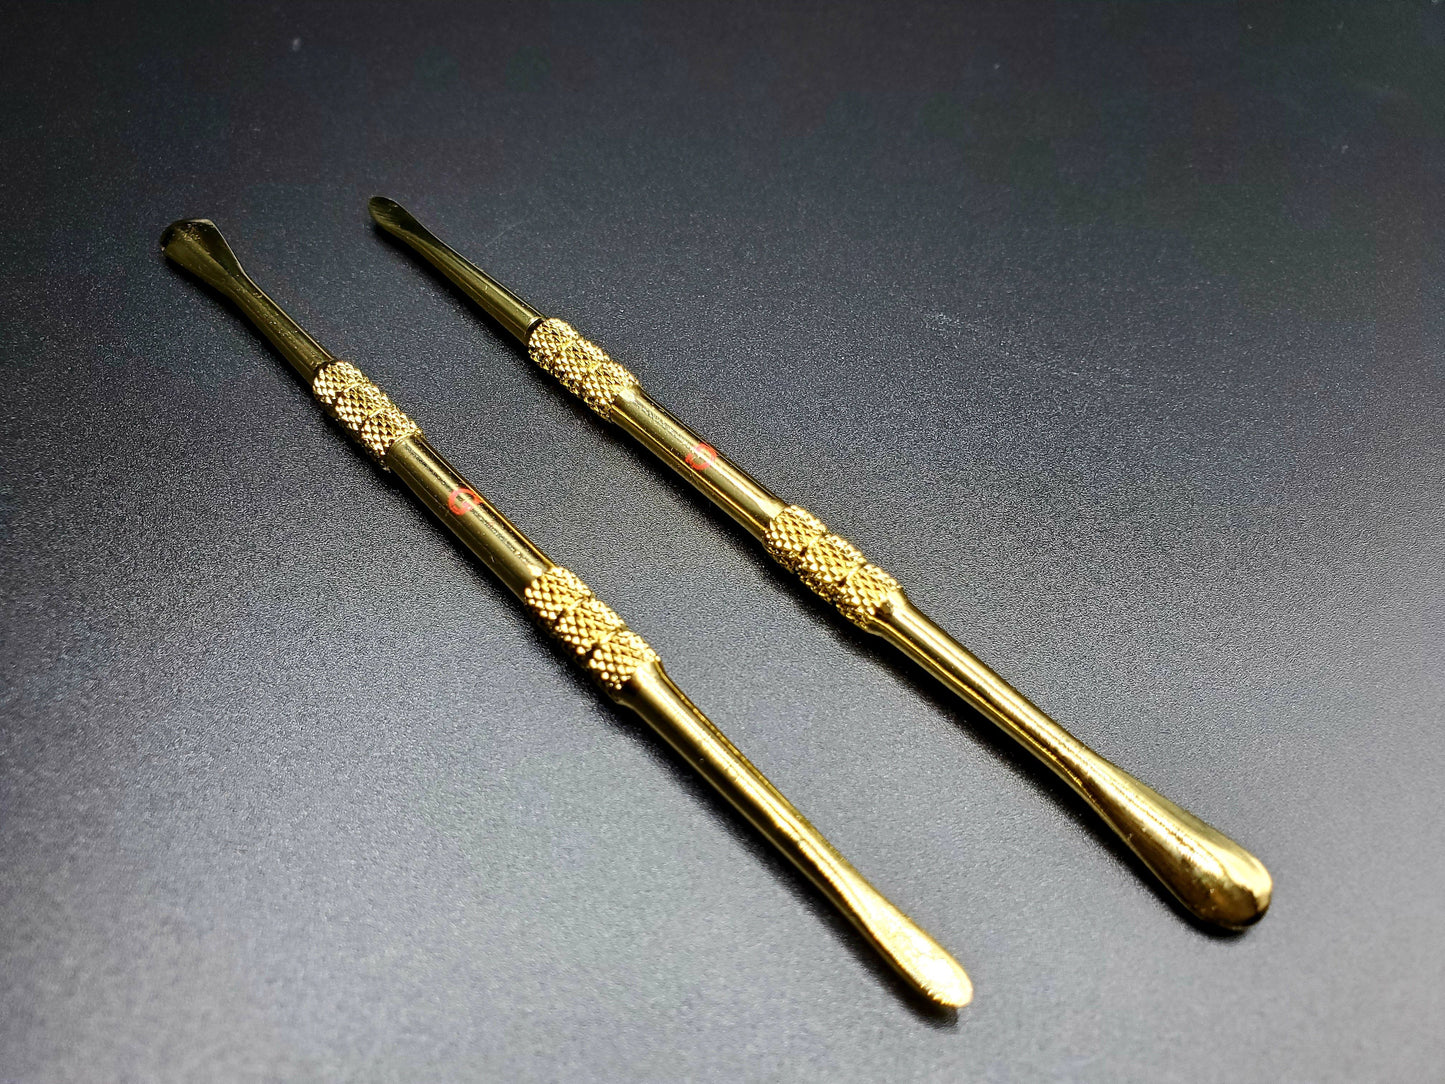 Gold Plated Stainless Steel Dabber Flower Power Packages 